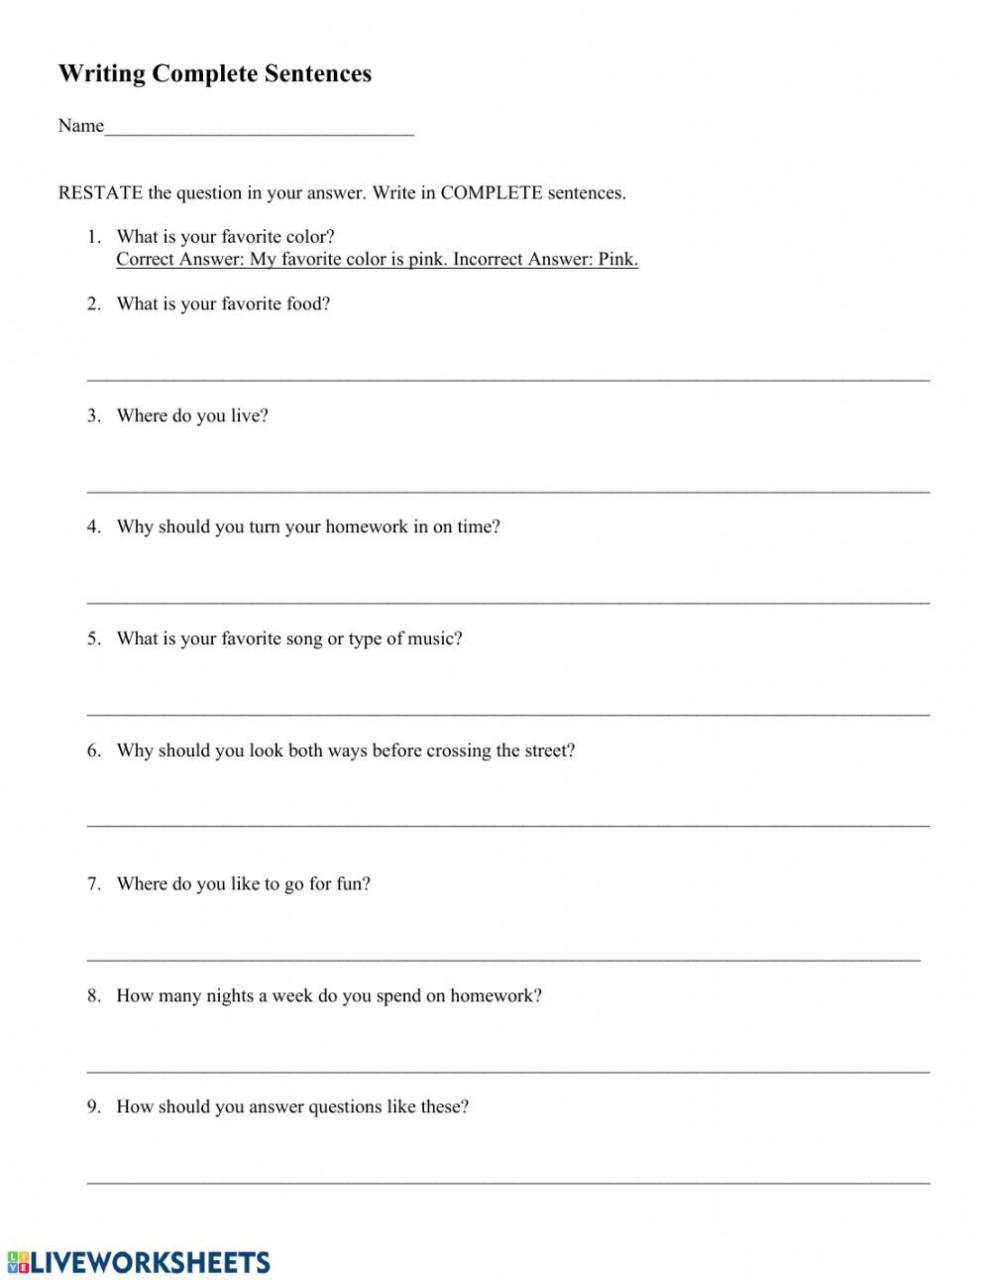 30 Restating the Question Worksheet Education Template